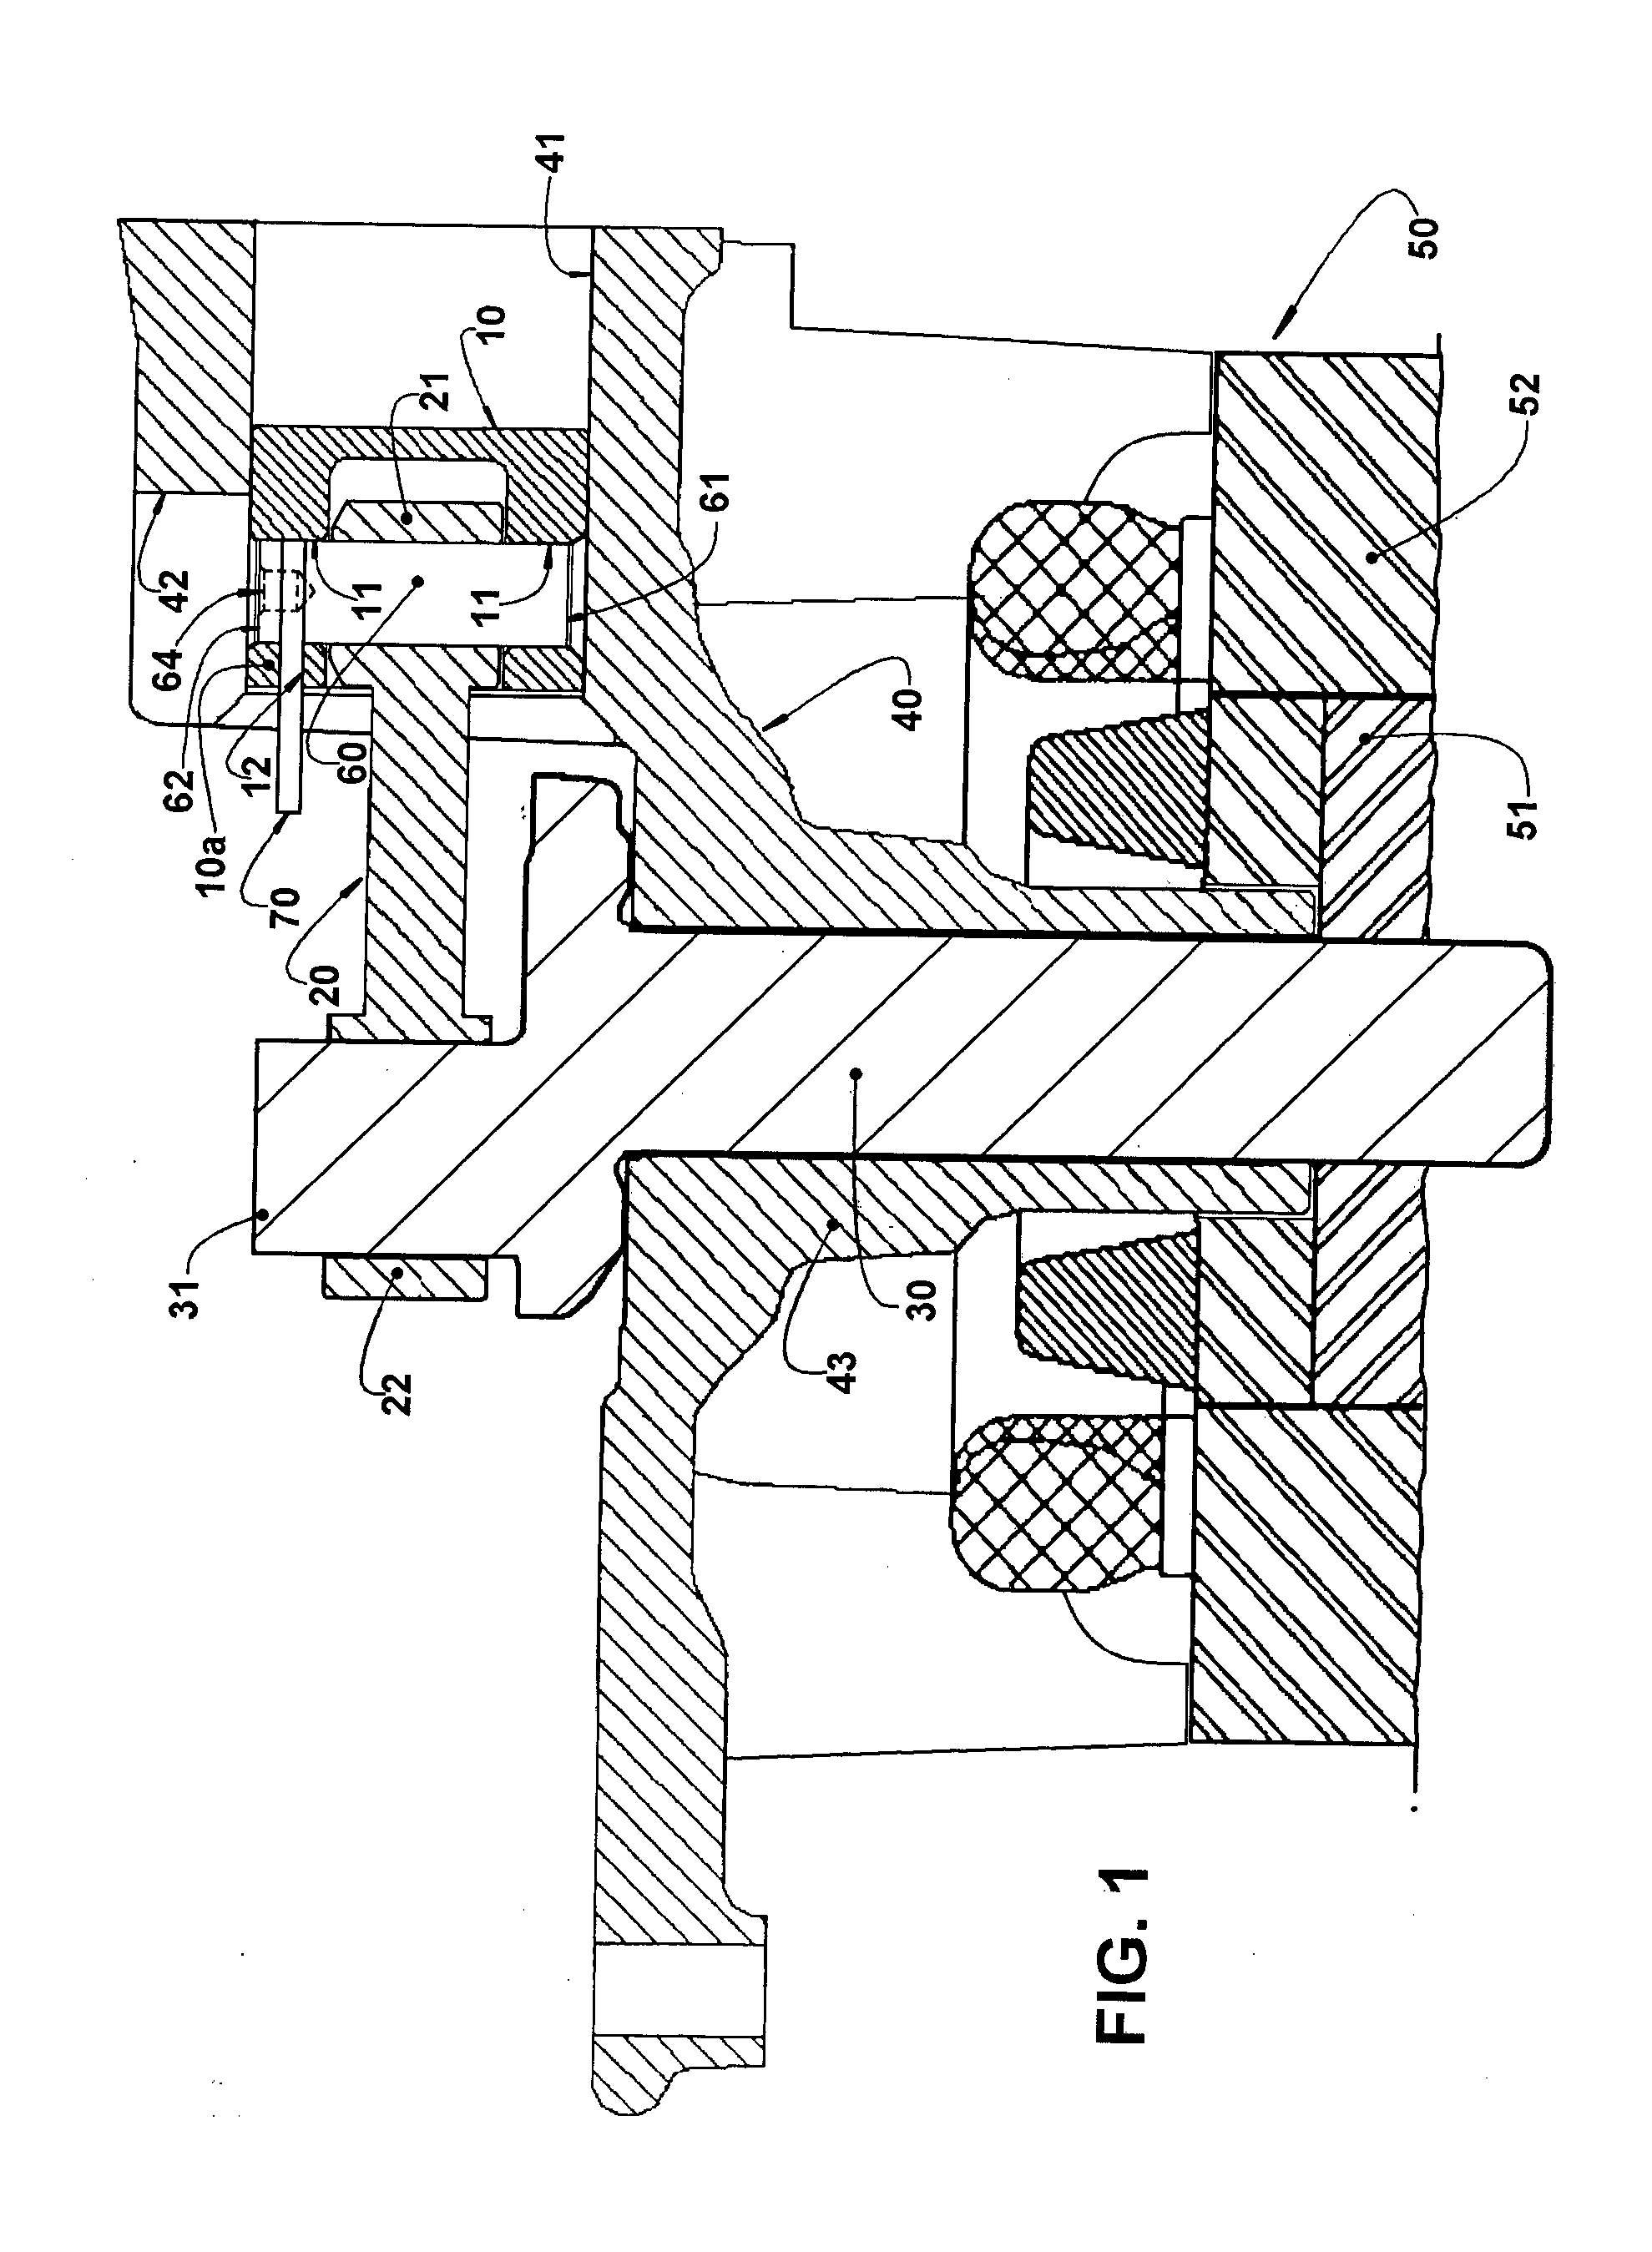 Mounting arrangement for a piston-connecting rod assembly in a refrigeration compressor